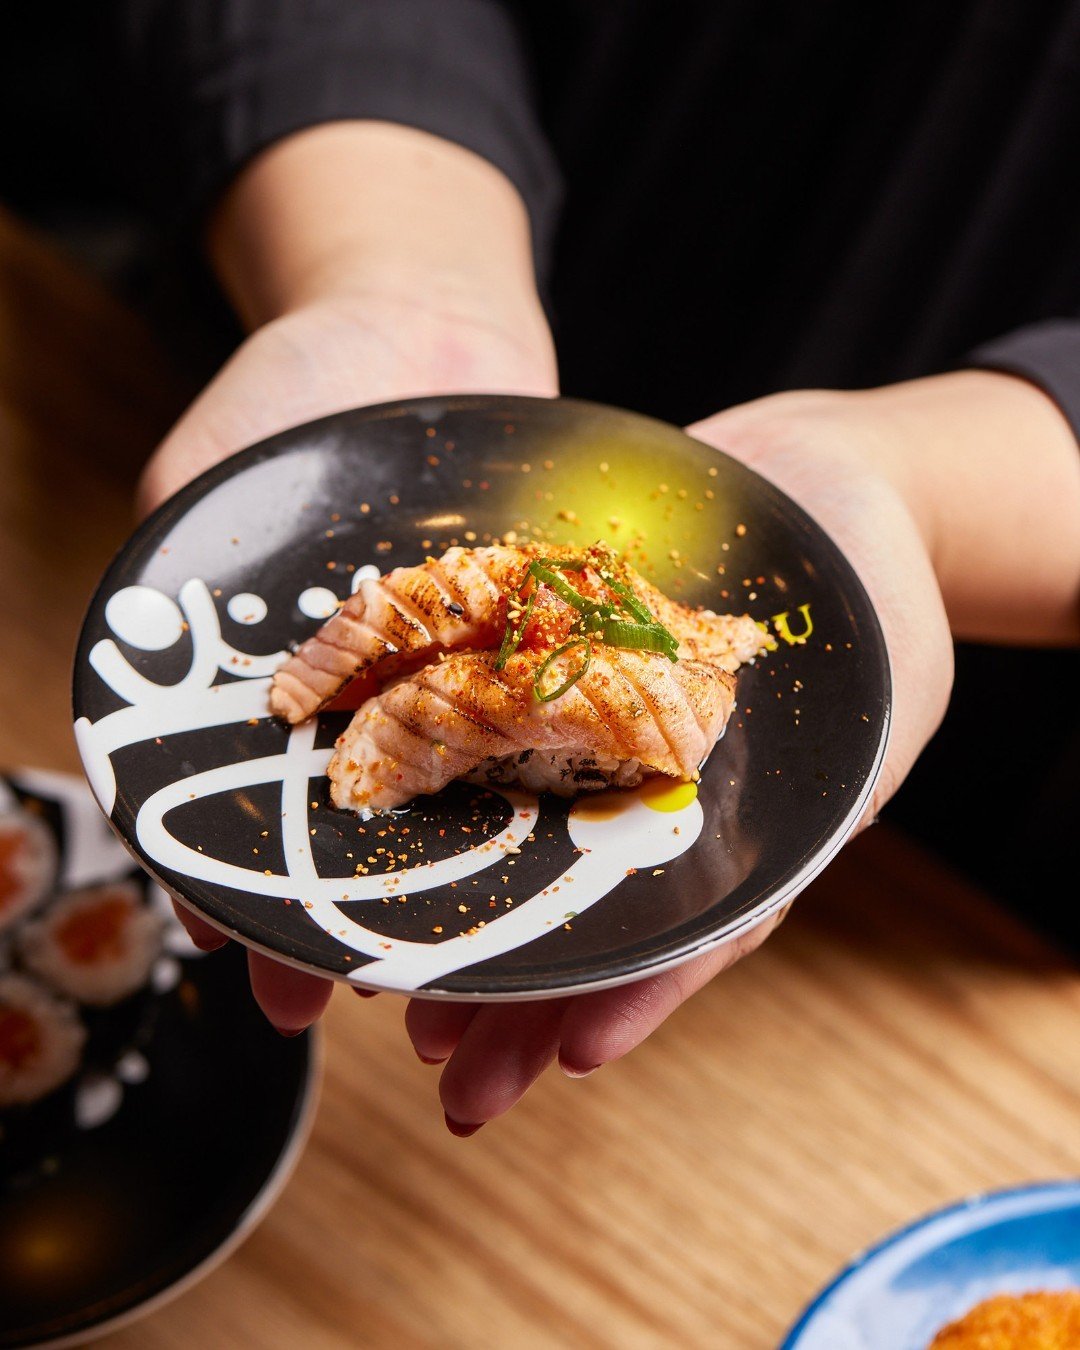 Craving some seriously good nigiri? Look no further than Sushi Hotaru - it's sushi heaven in every mouthful! 🌟

Bonus tip: if your mum loves sushi, make sure to join us for Mother's Day ❤️

#sushihotaru #sushilovers #sushitrain #sushirestaurant #the